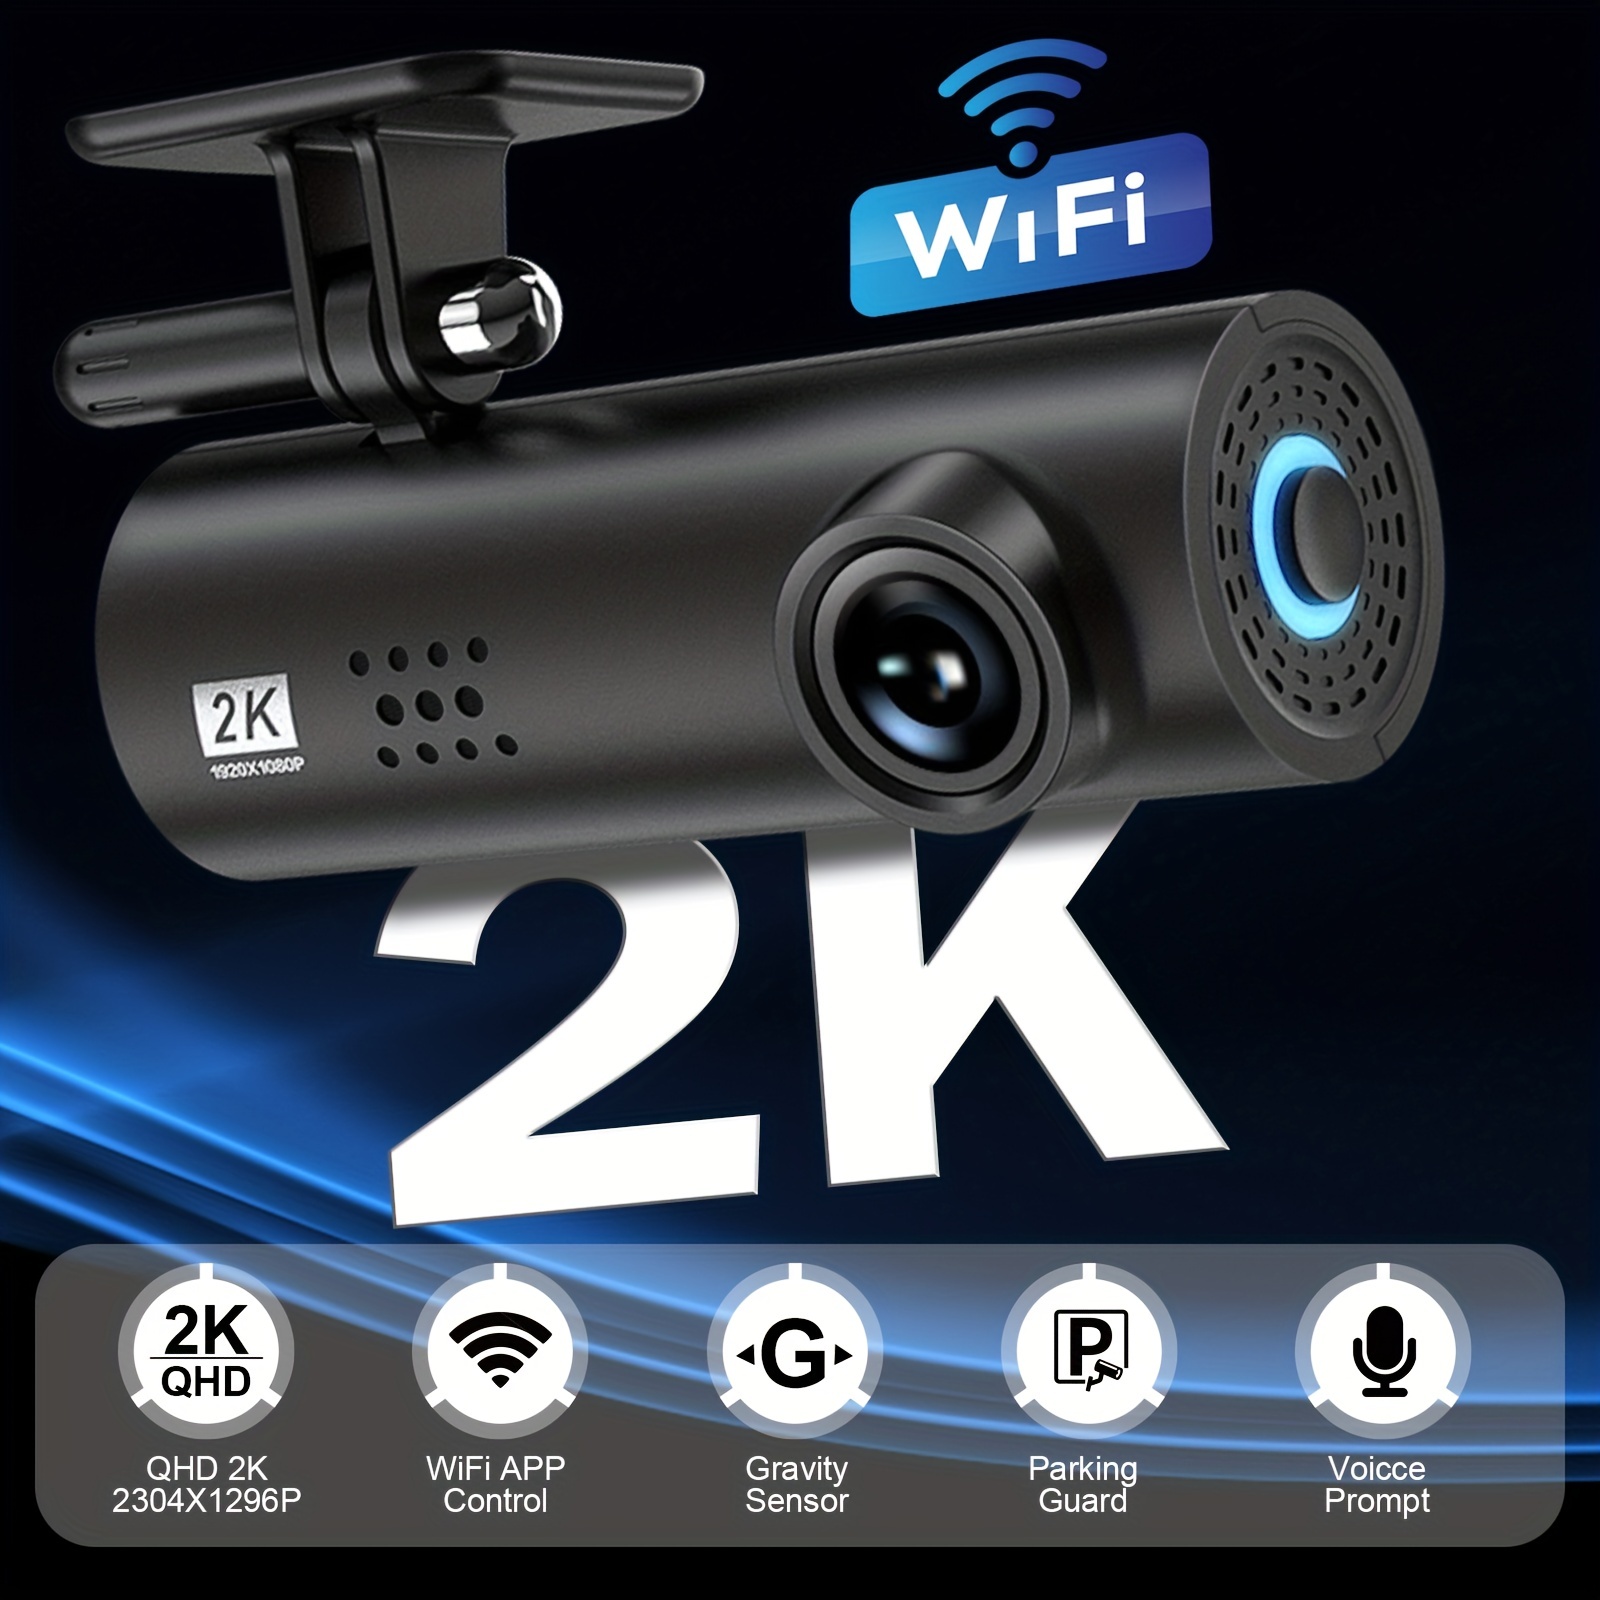  Dash Cam 2K, KAWA WiFi Dash Camera for Cars 1440P with  Hand-Free Voice Control, Night Vision, Mini Hidden Dashcam Front, Emergency  Lock, Loop Recording, 24-Hour Parking Monitor, APP, Support 256GB Max 